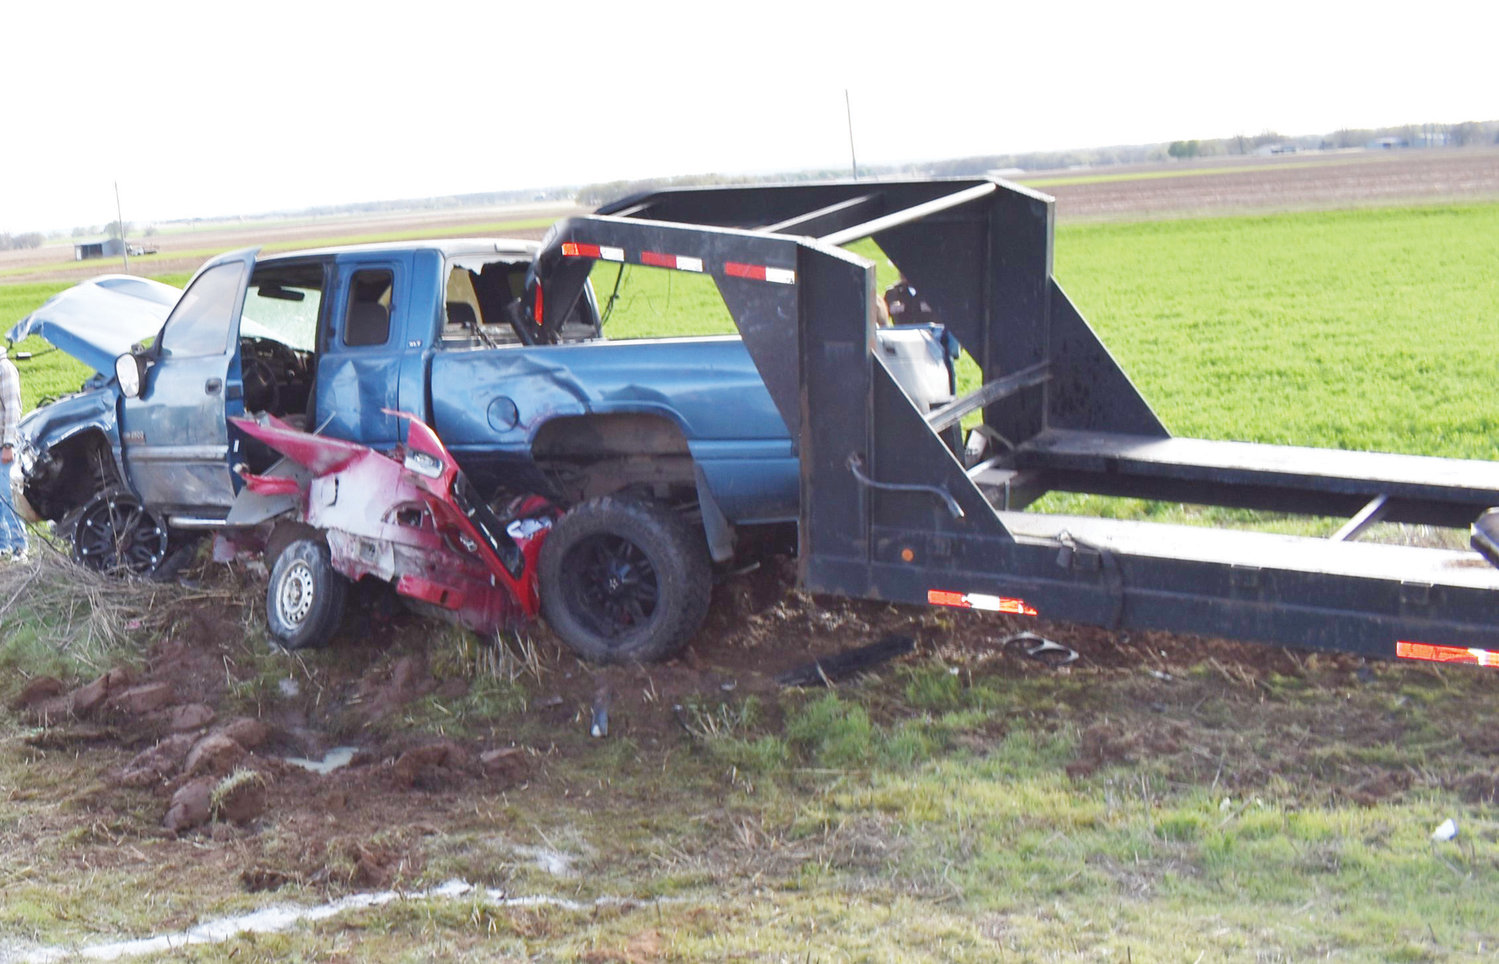 Two people were killed in this horrific two vehicle accident on I-35 Monday afternoon at mile marker 99.